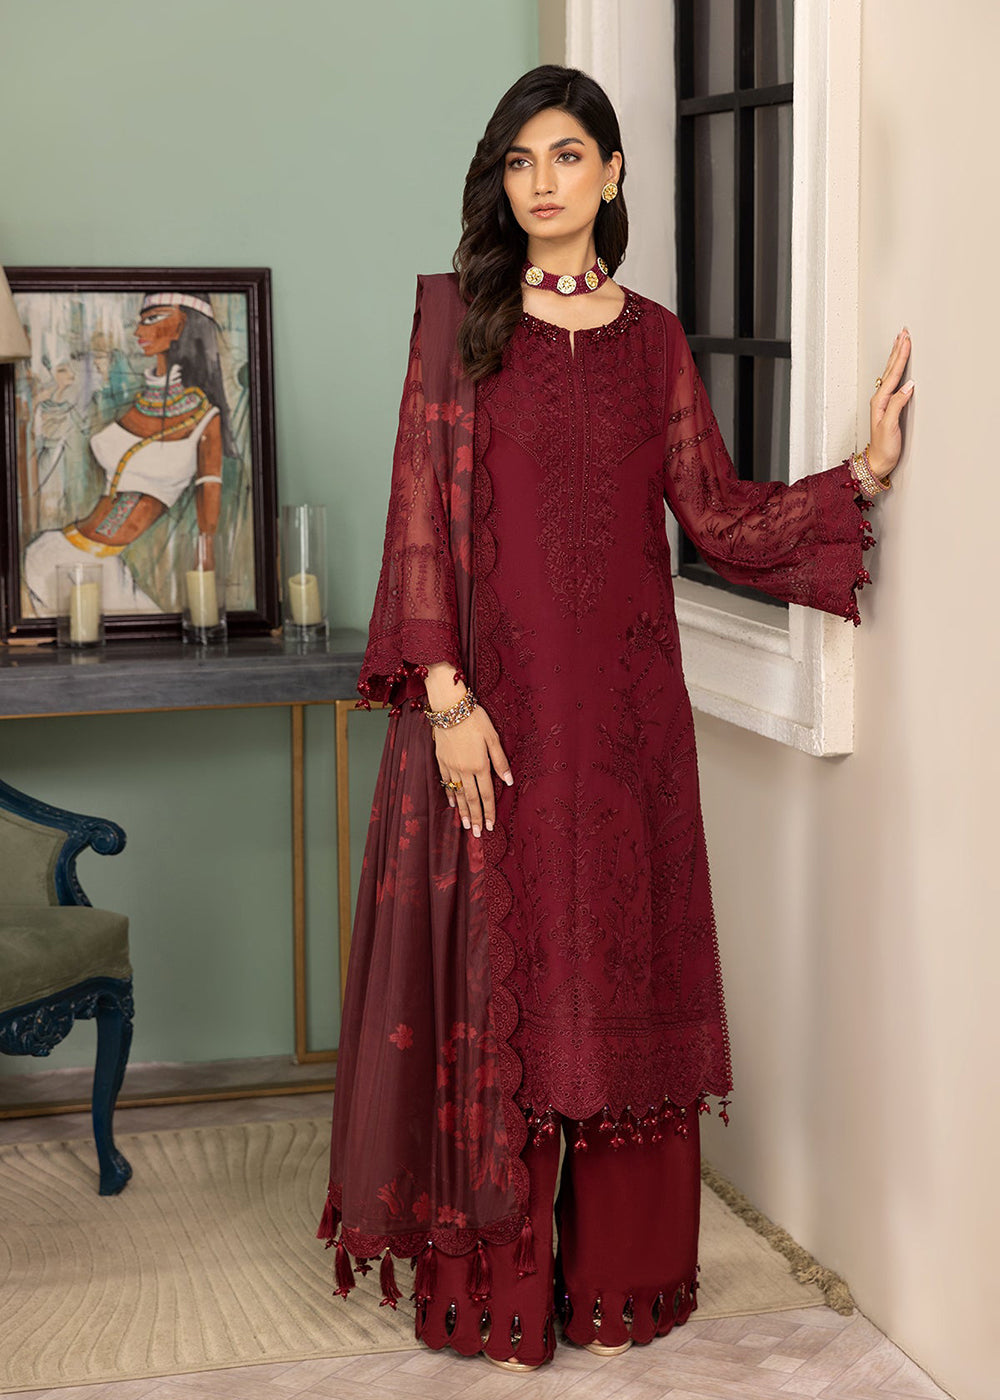 Buy Now Maroon Formal Suit - Alizeh - Dhaagay Formals '23 - V02D07 - Azalea Online in USA, UK, Canada & Worldwide at Empress Clothing. 